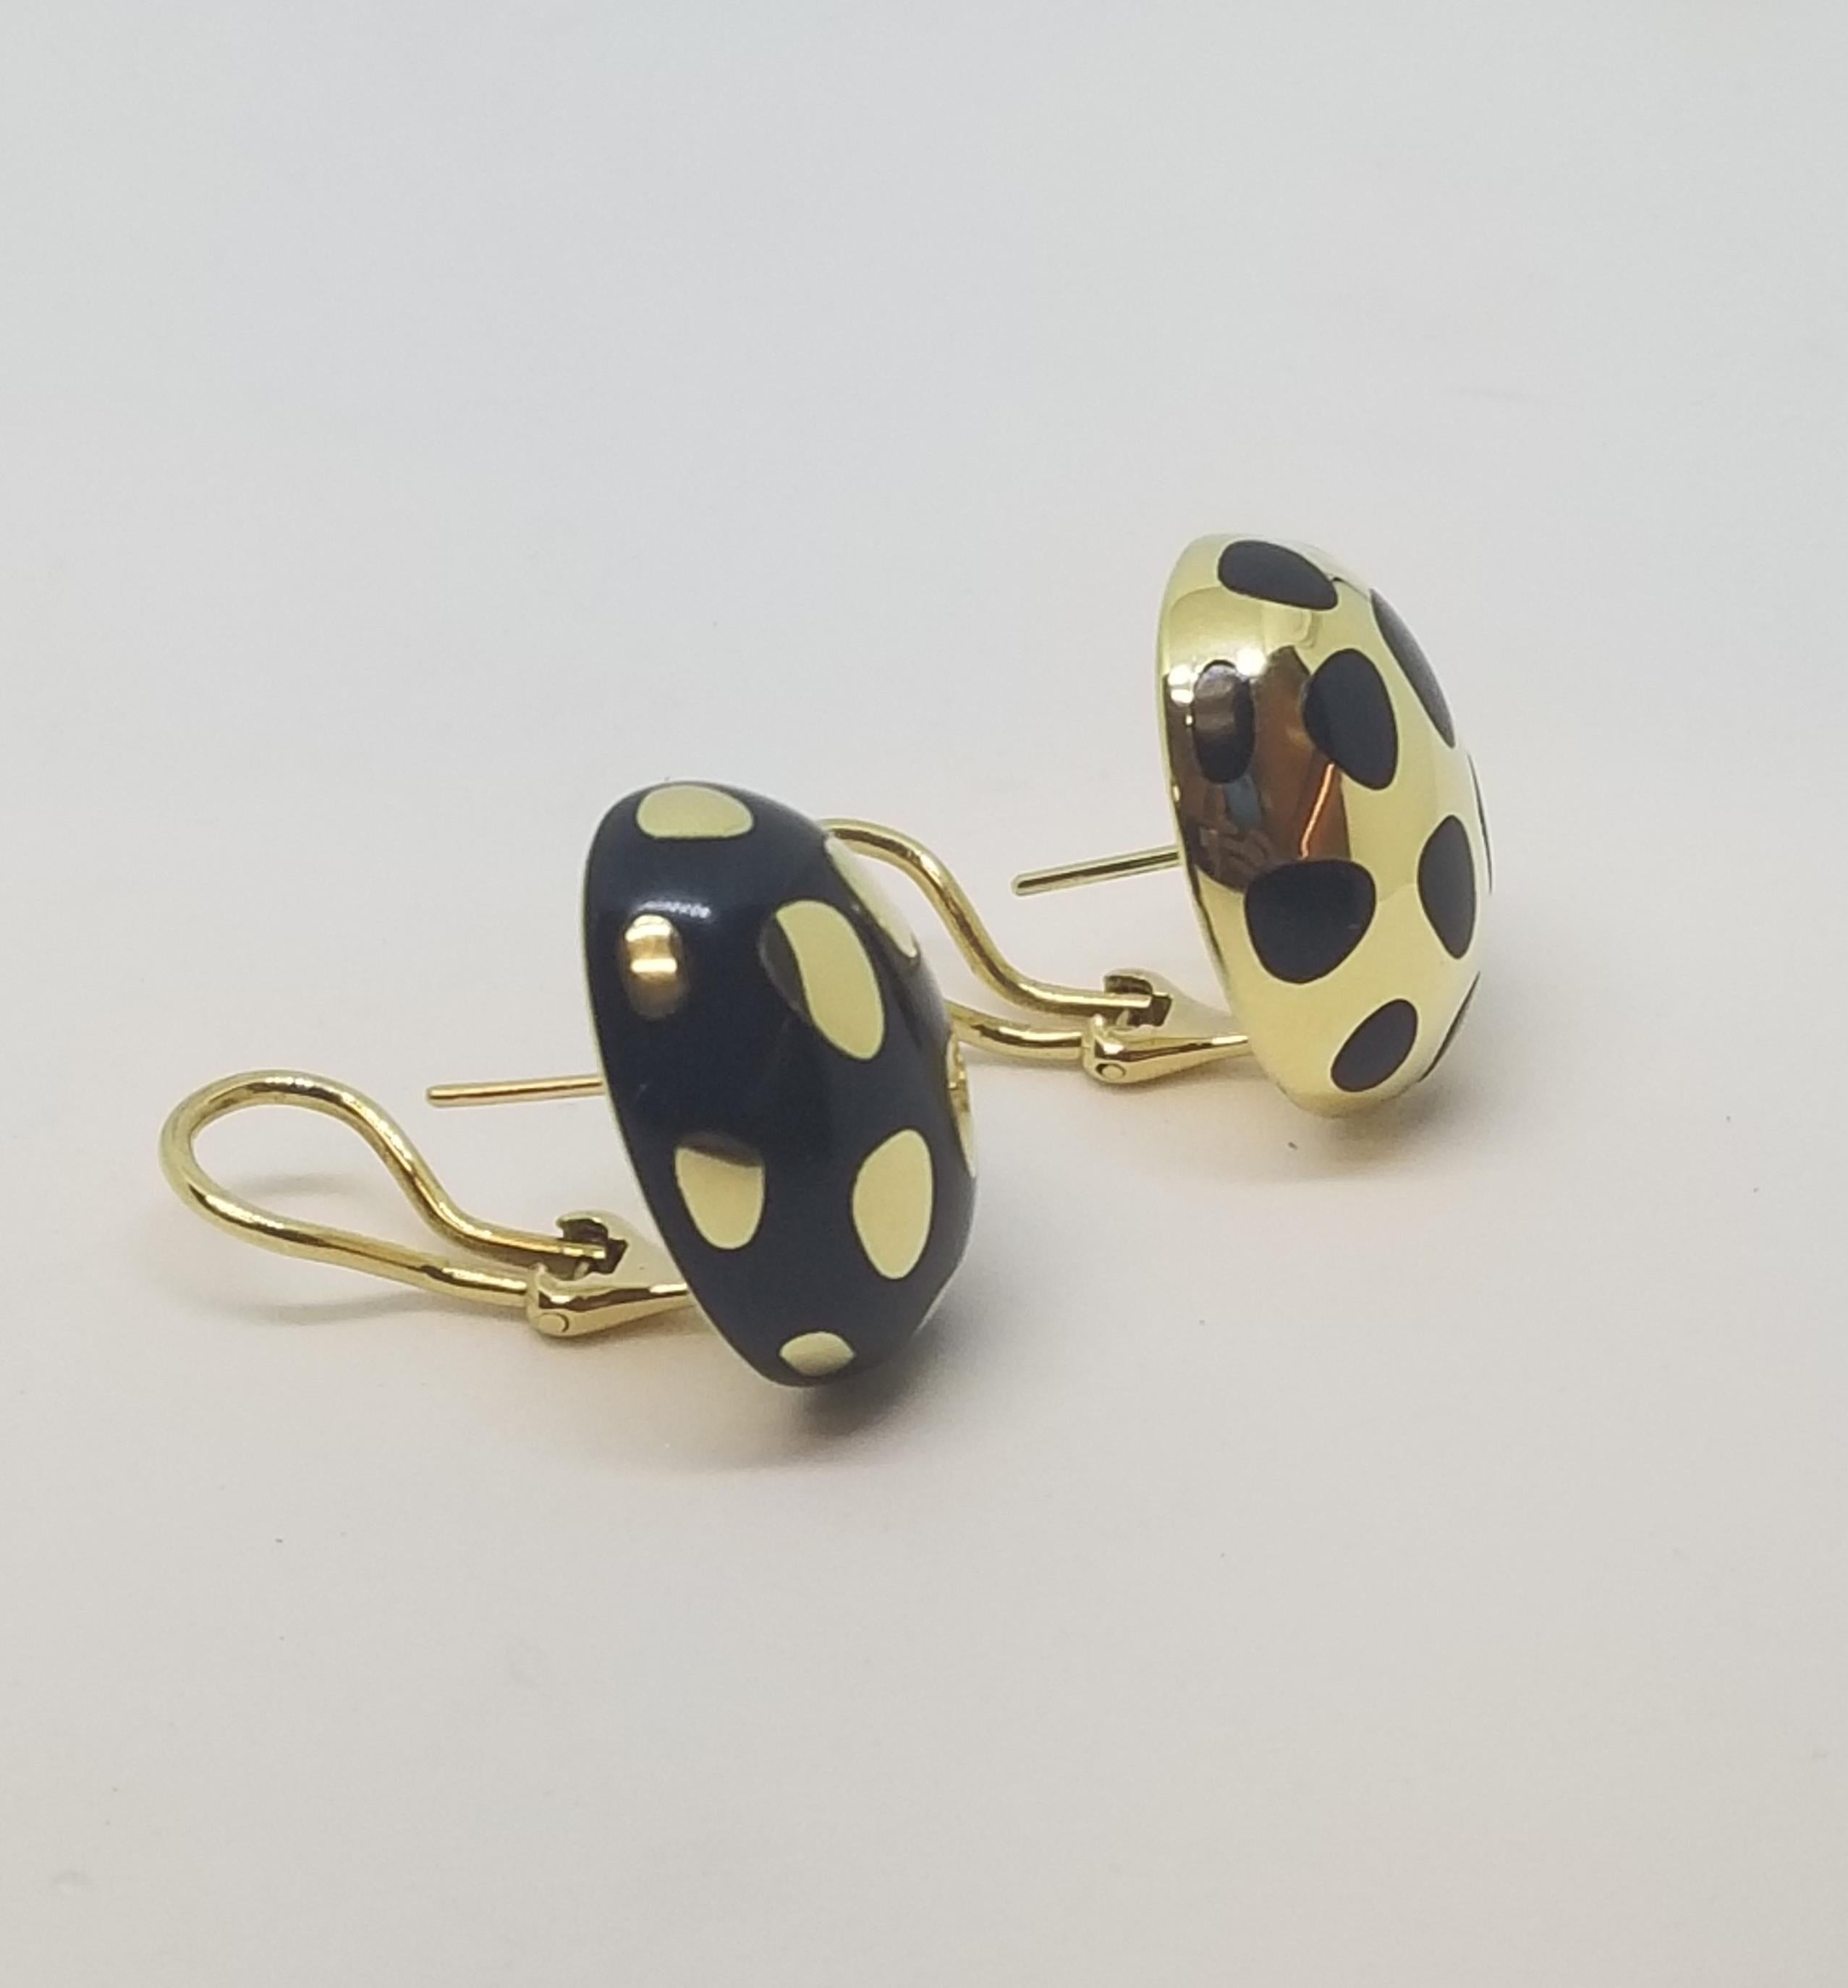 Contemporary Angela Cummings for Tiffany & Co. Vintage Gold and Black Jade Earrings